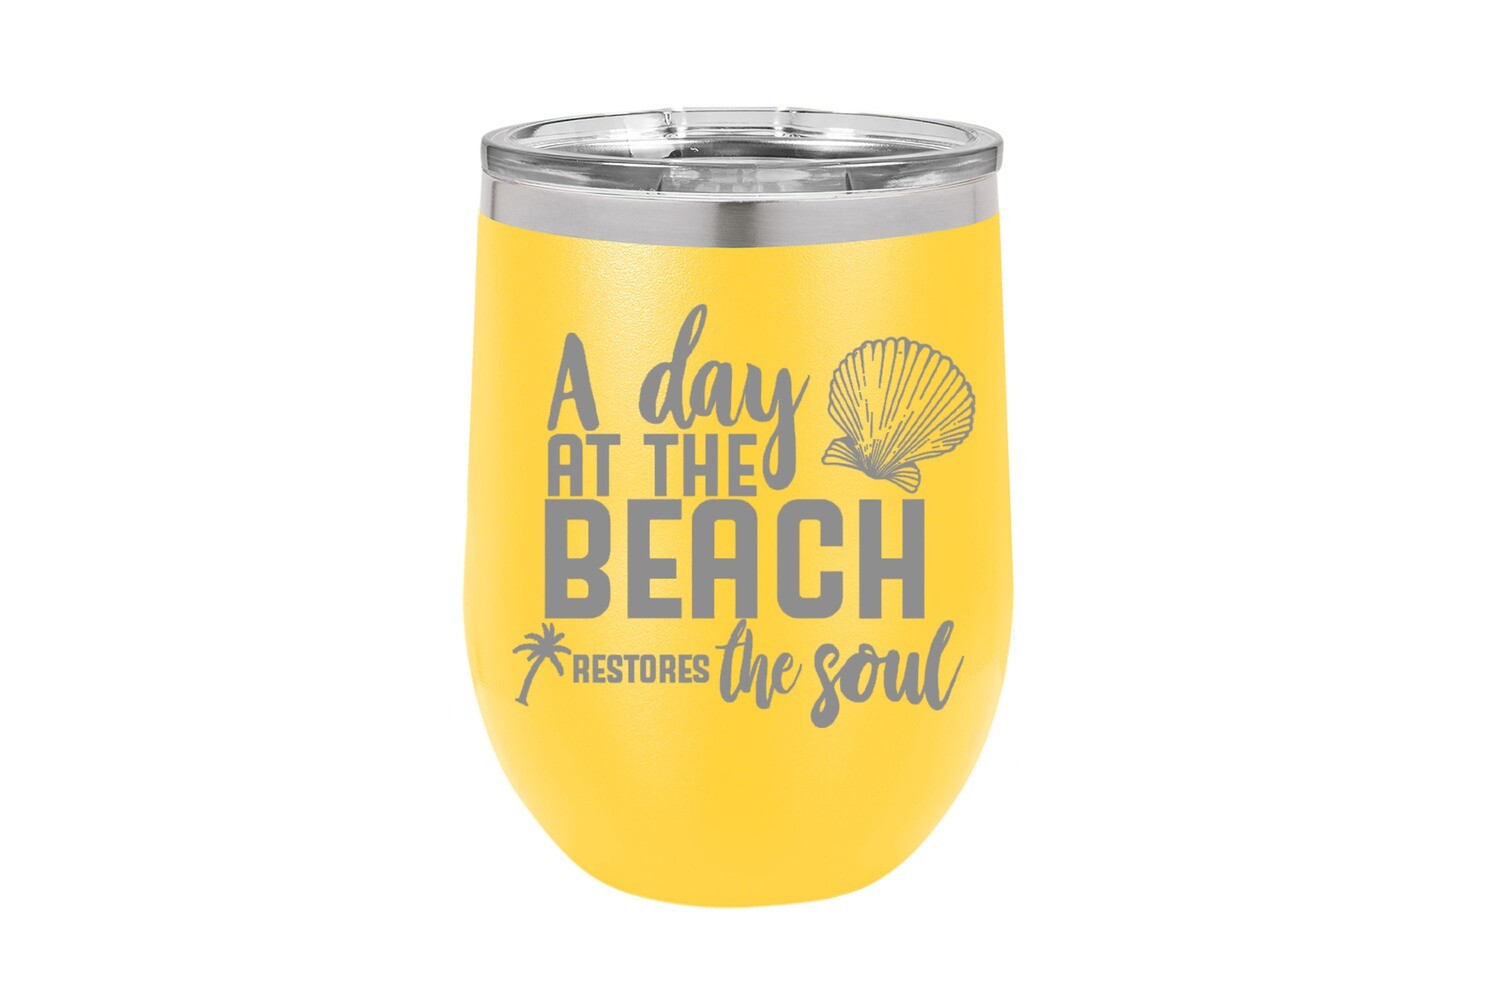 "A Day at the Beach Restores the Soul" Insulated Tumbler 12 oz